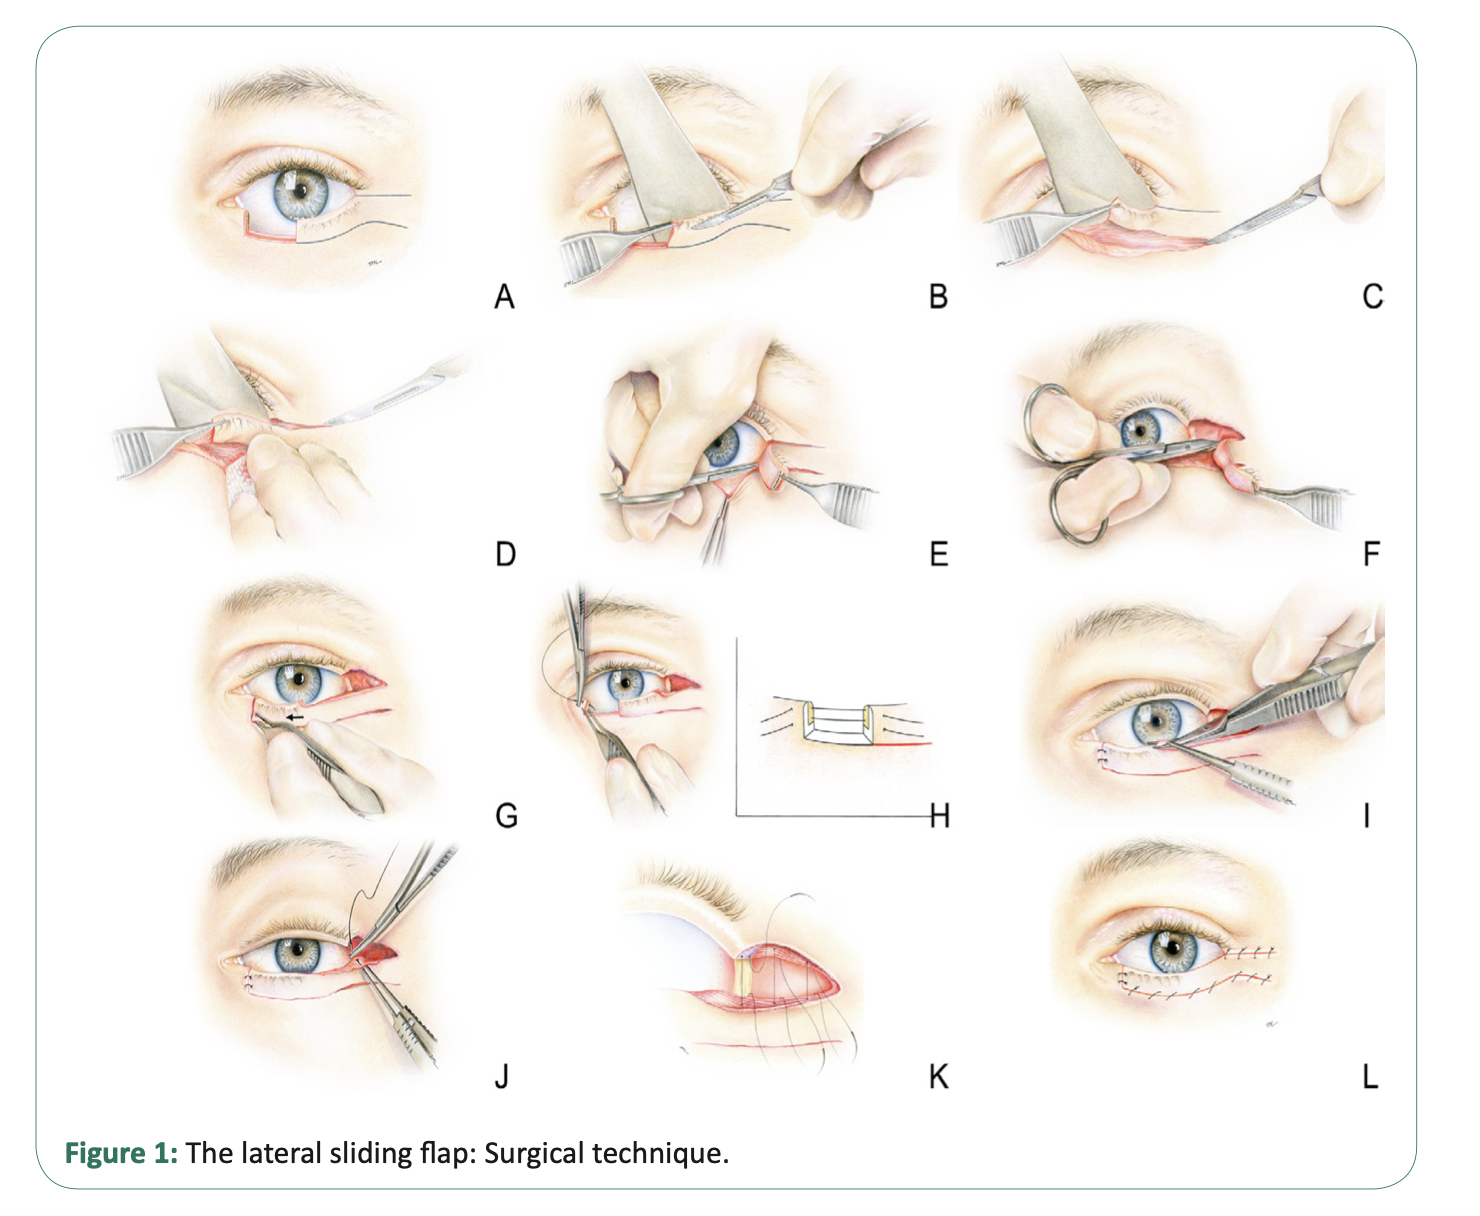 Lateral sliding flap for one-step reconstruction of medium-sized eyelid defects (eyelid reconstruction)